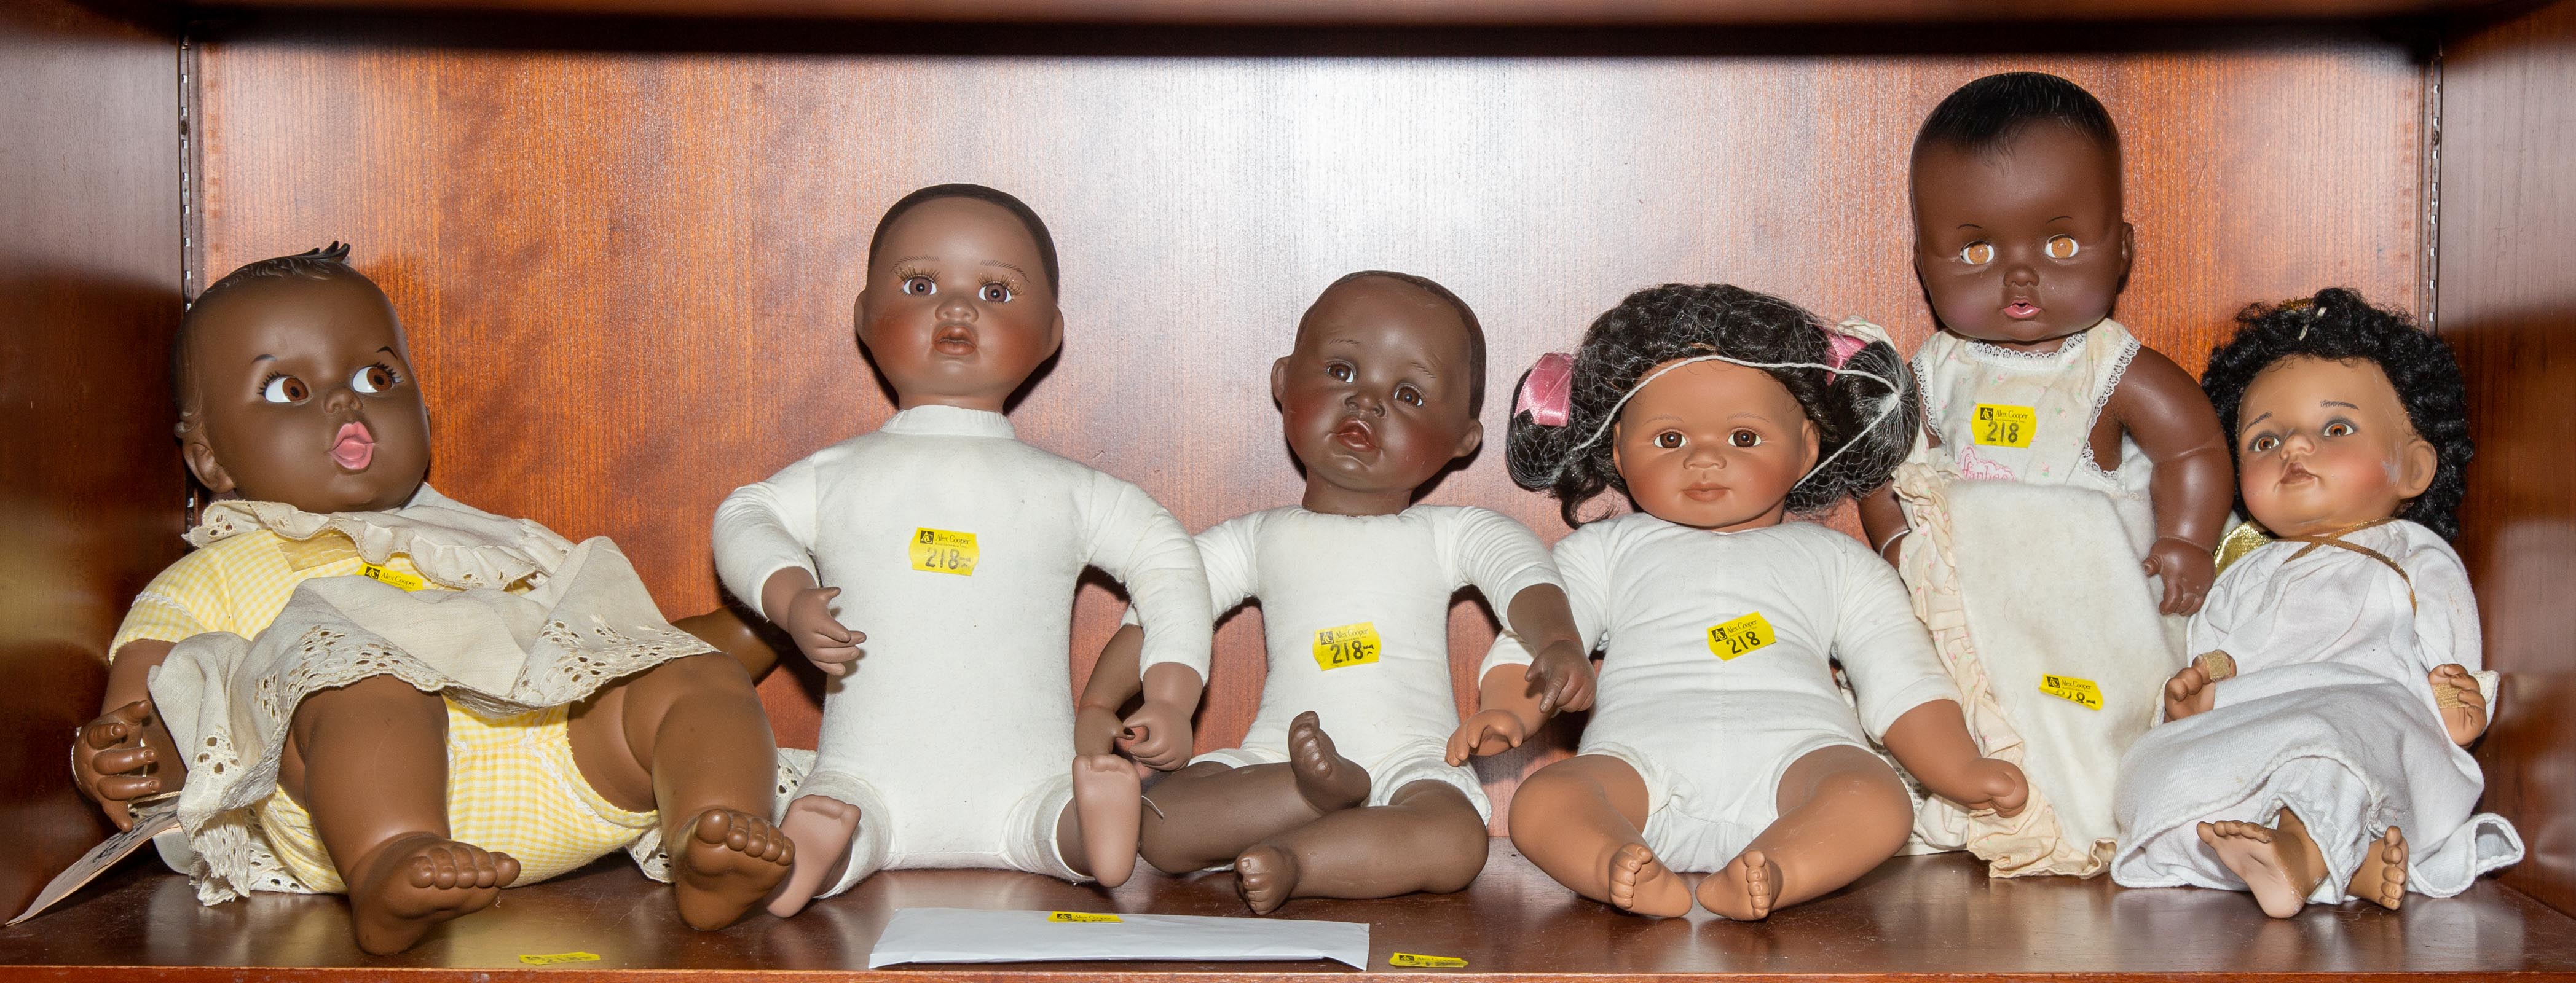 SIX AFRICAN AMERICAN DOLLS Including 2898d9